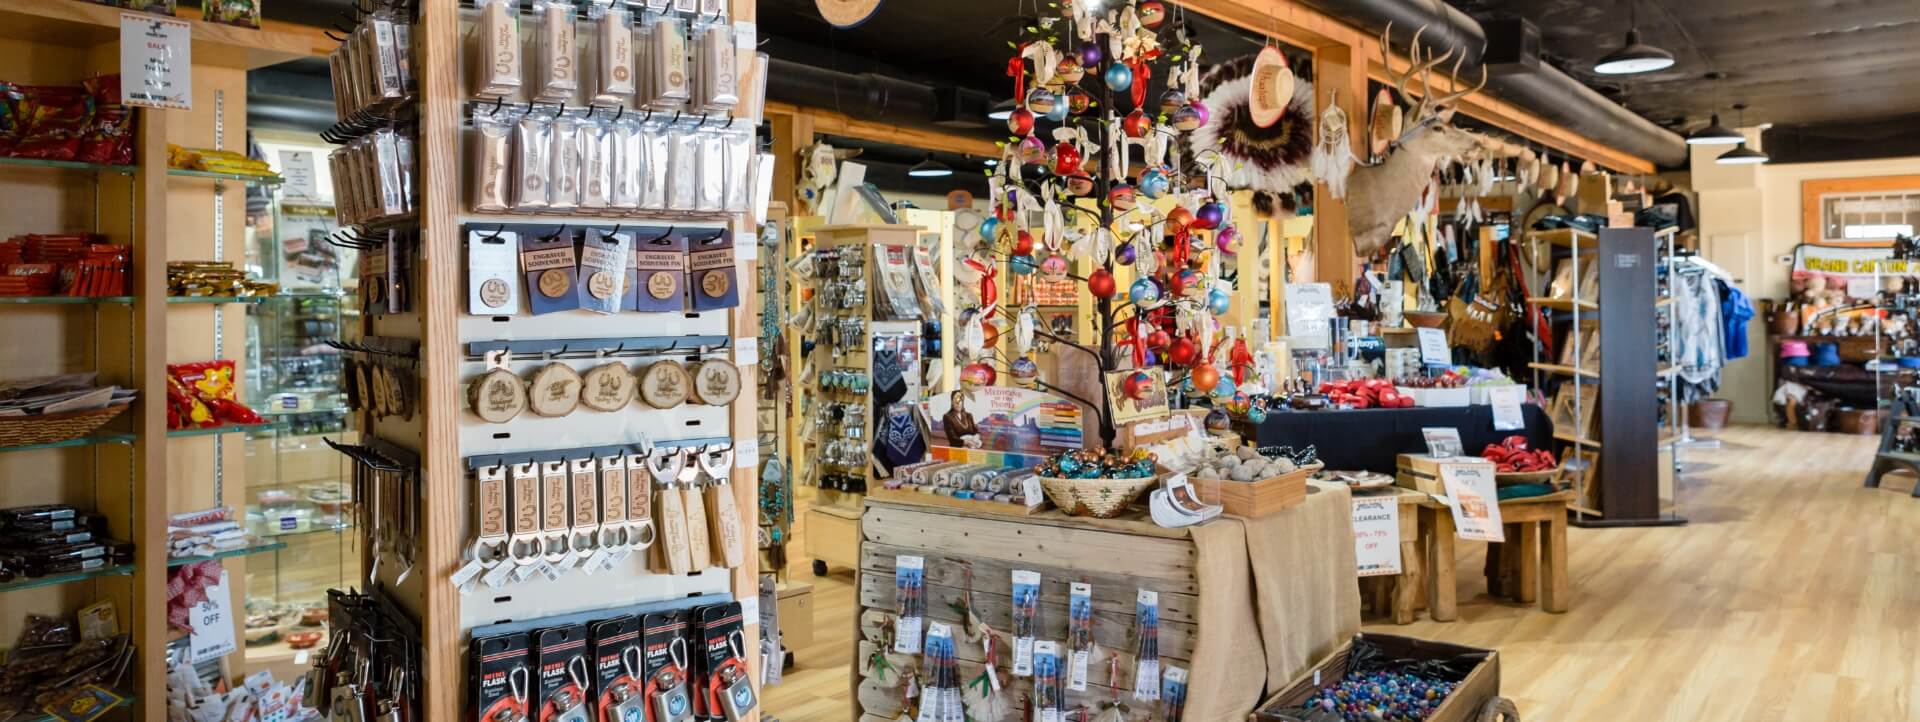 The Grand Canyon West Gift Shop.